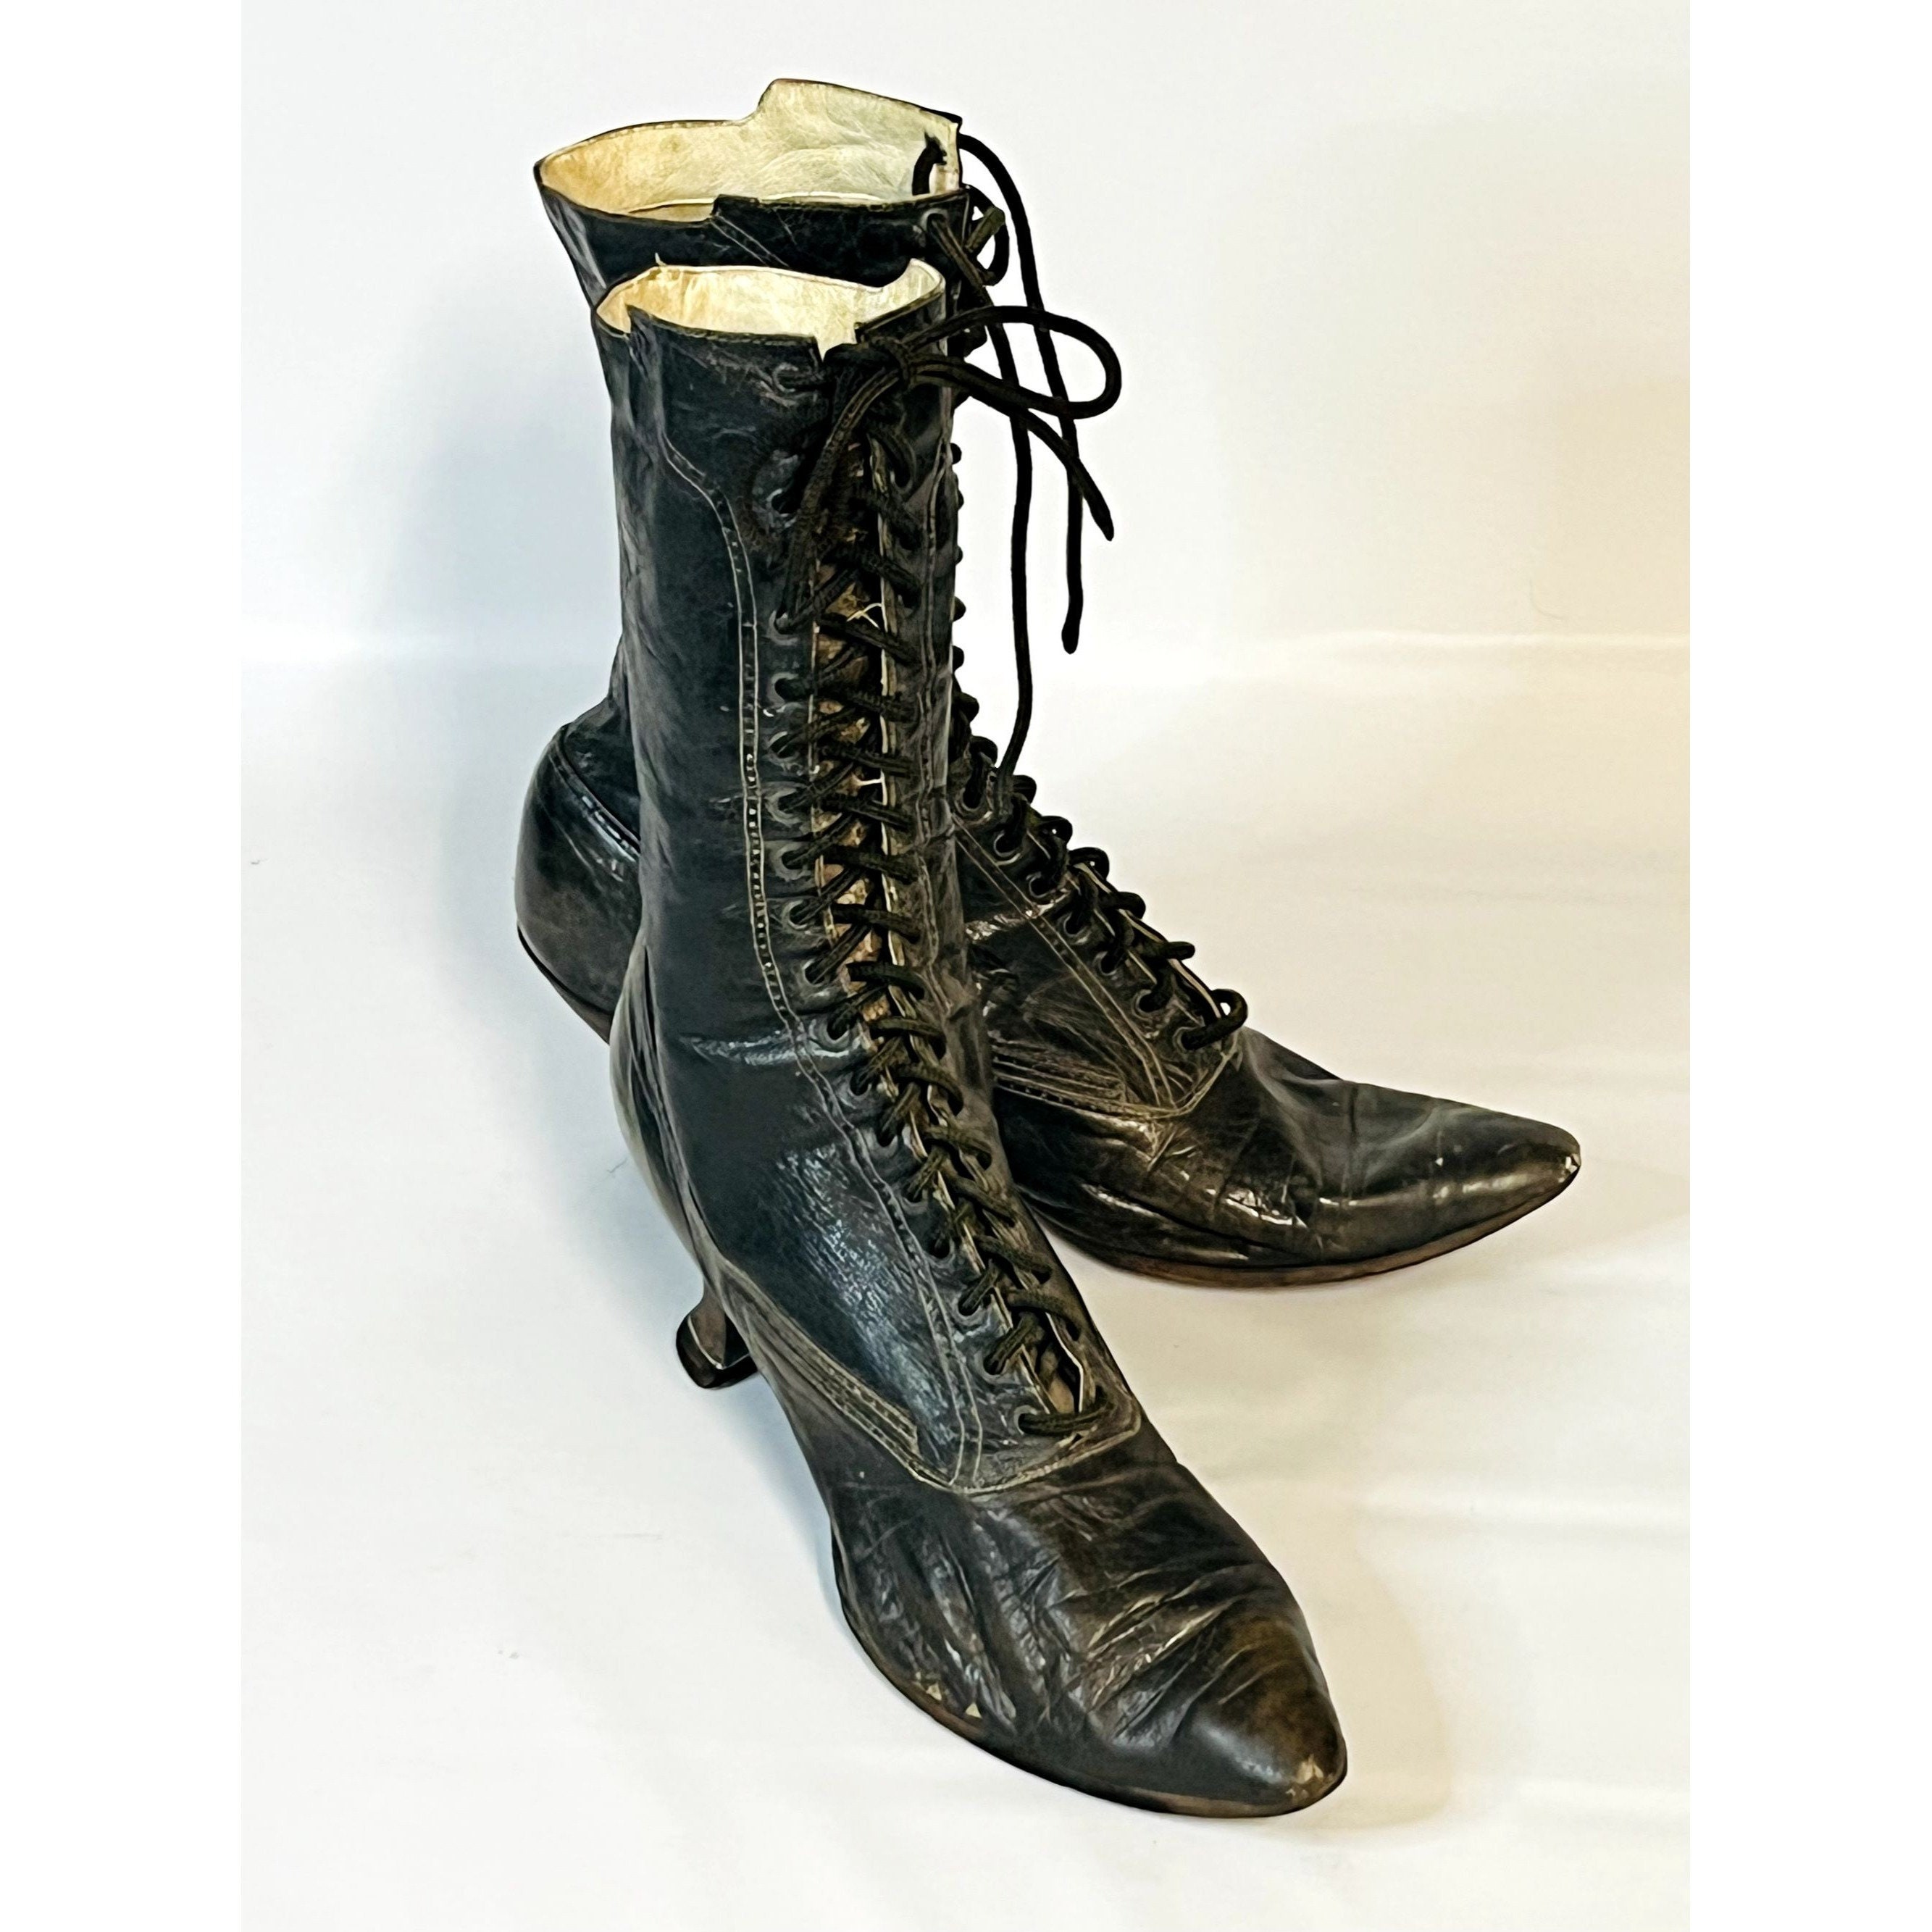 Zunfeo Riding Boot for Women Vintage Steampunk Mid-Calf Victorian